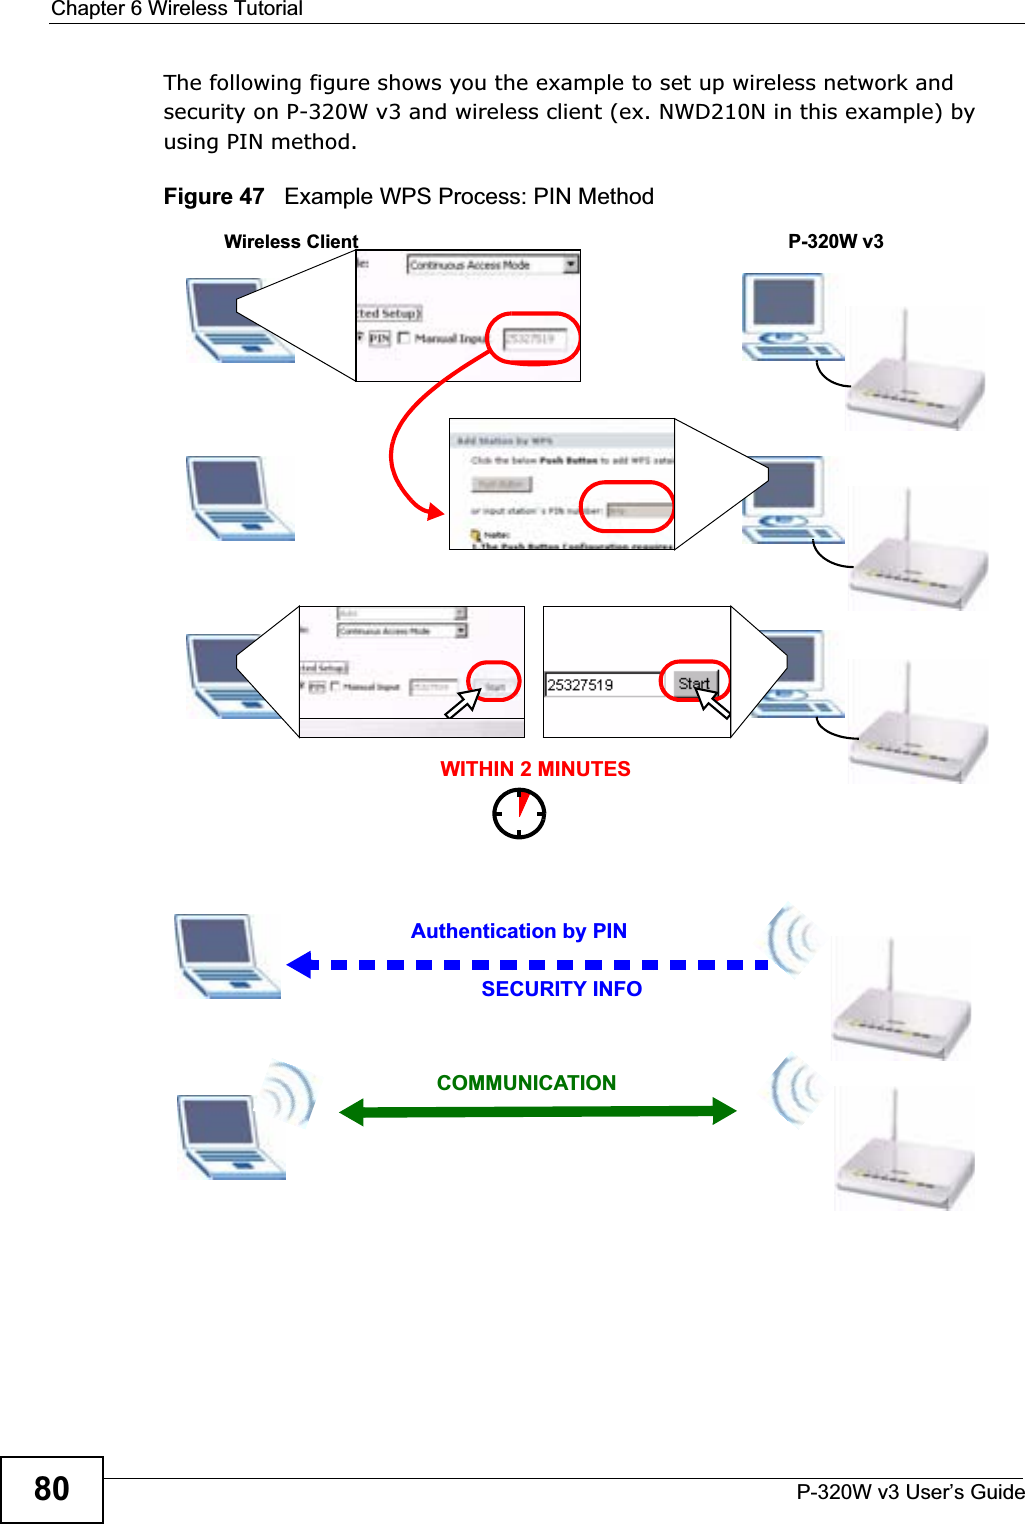 Chapter 6 Wireless TutorialP-320W v3 User’s Guide80The following figure shows you the example to set up wireless network and security on P-320W v3 and wireless client (ex. NWD210N in this example) by using PIN method. Figure 47   Example WPS Process: PIN MethodAuthentication by PINSECURITY INFOWITHIN 2 MINUTESWireless ClientP-320W v3COMMUNICATION